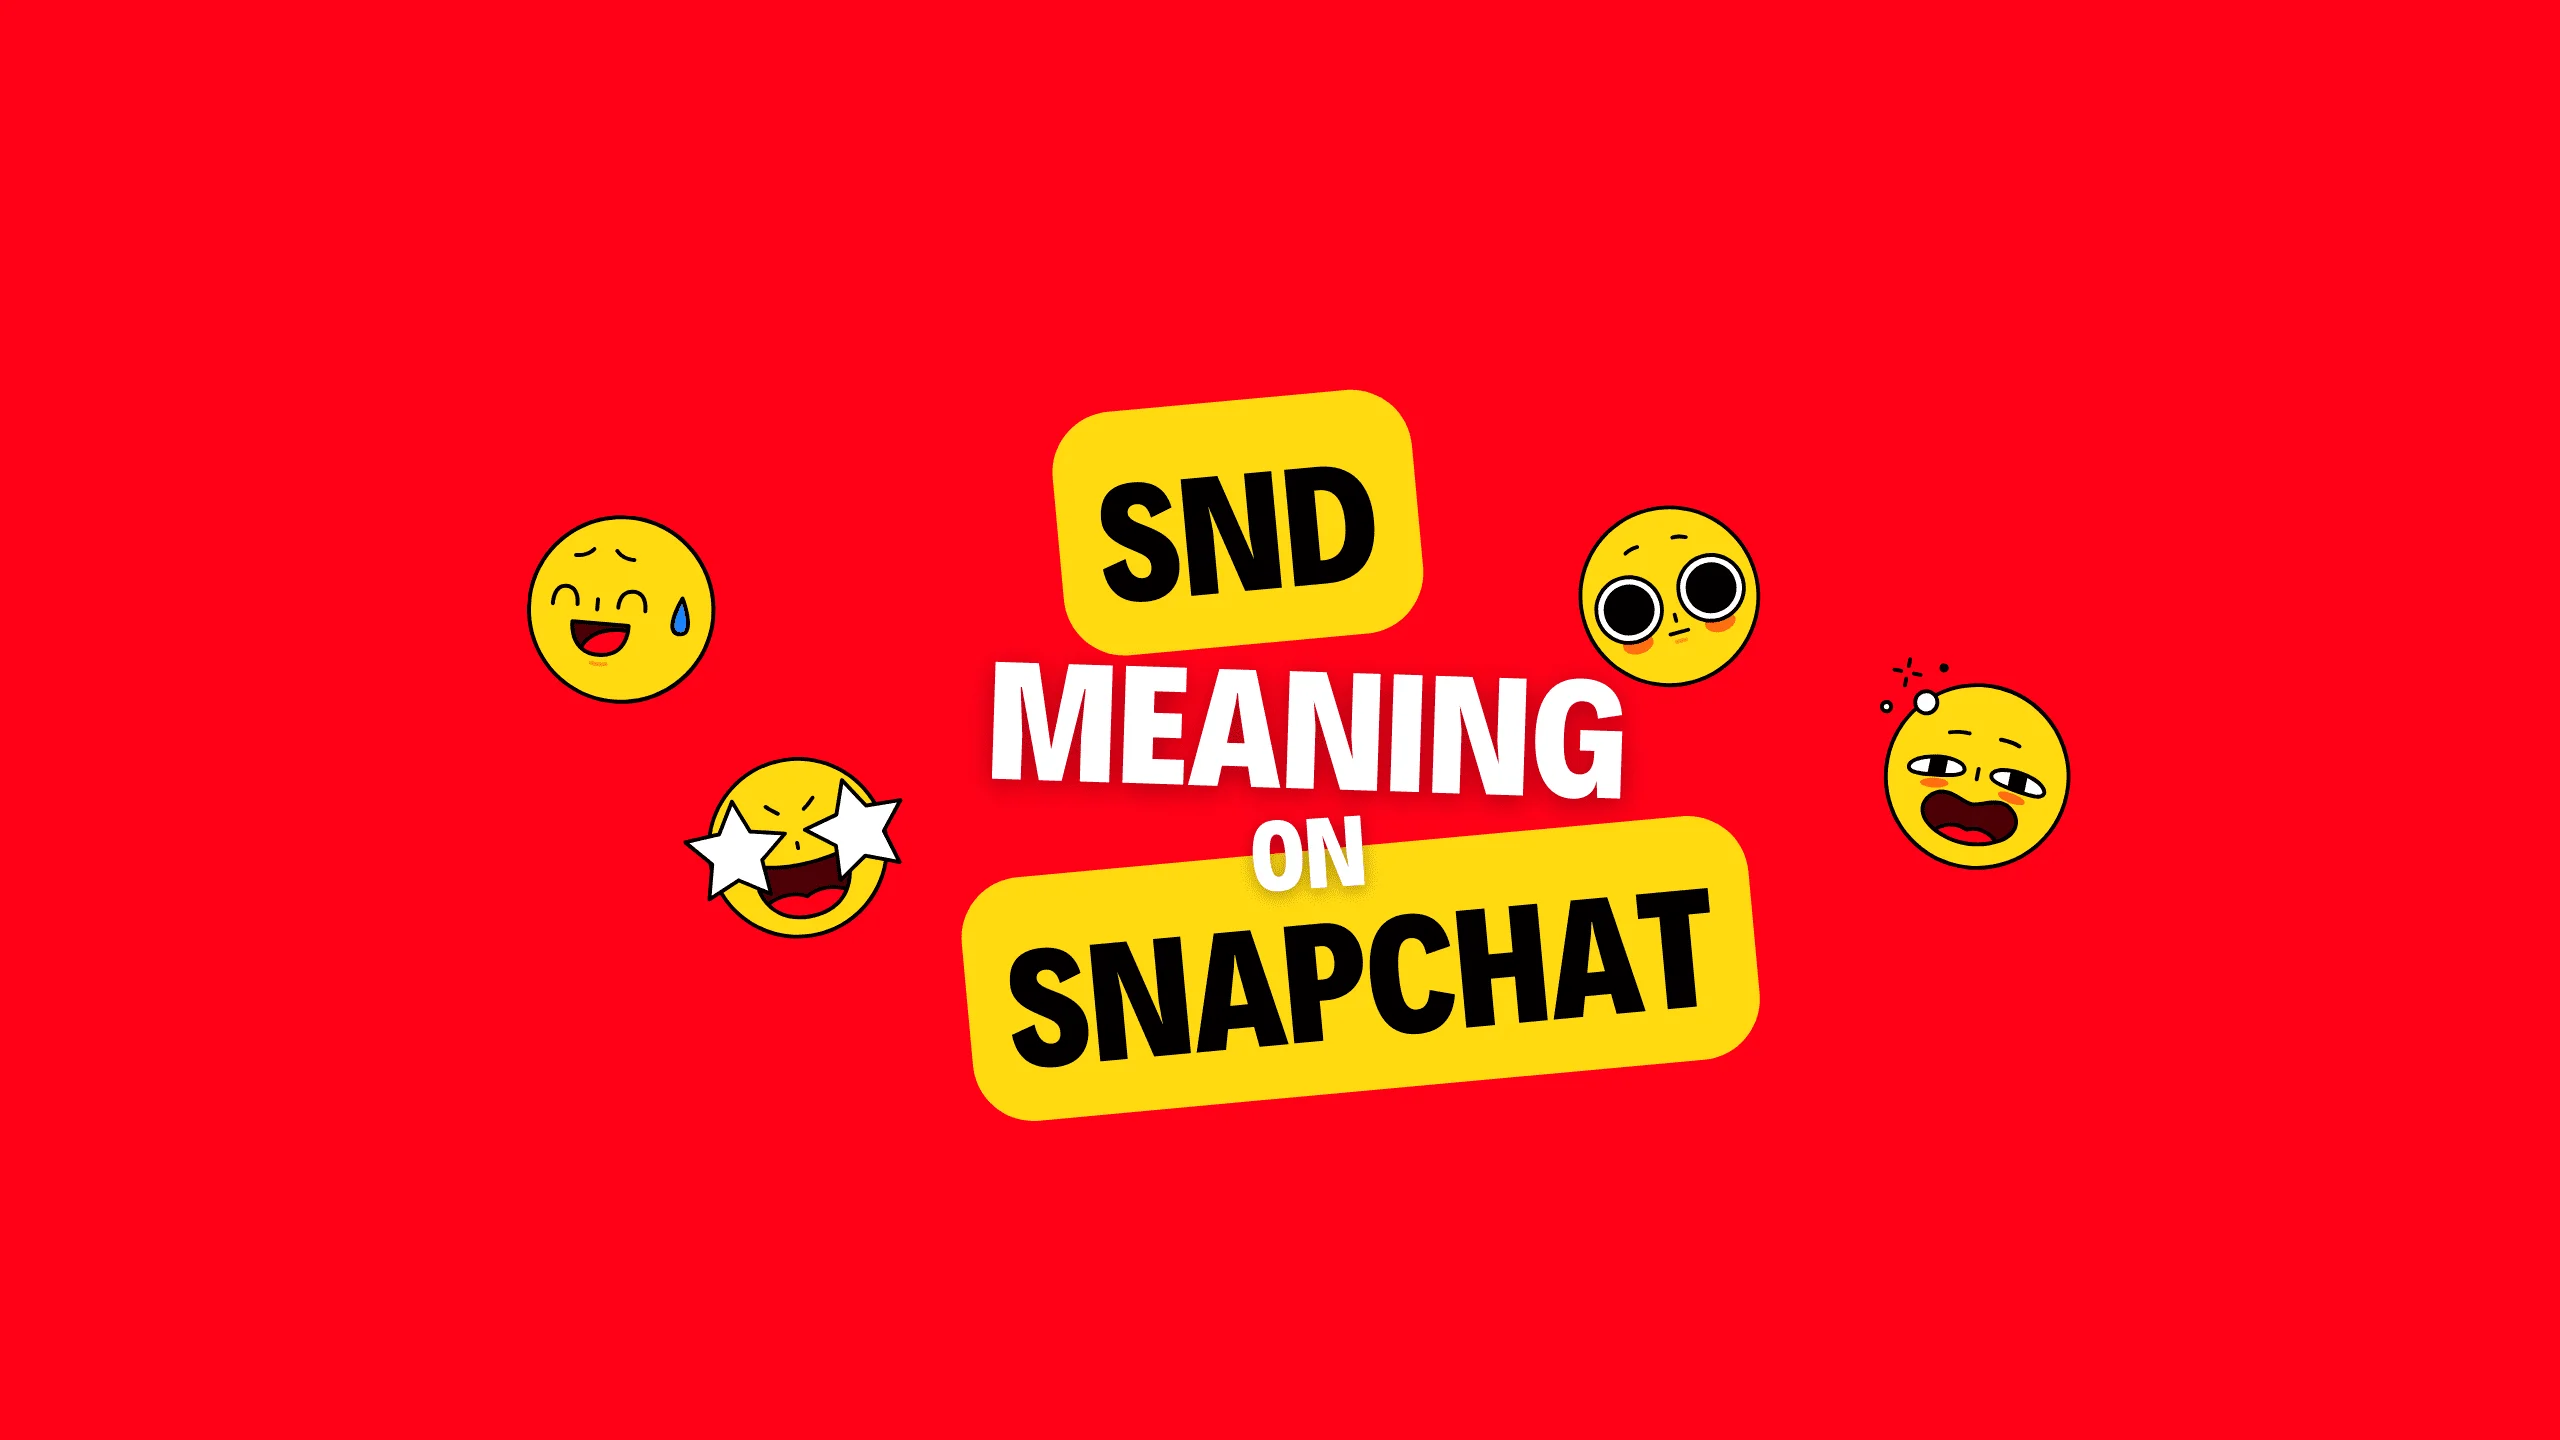 What does SND mean on Snapchat